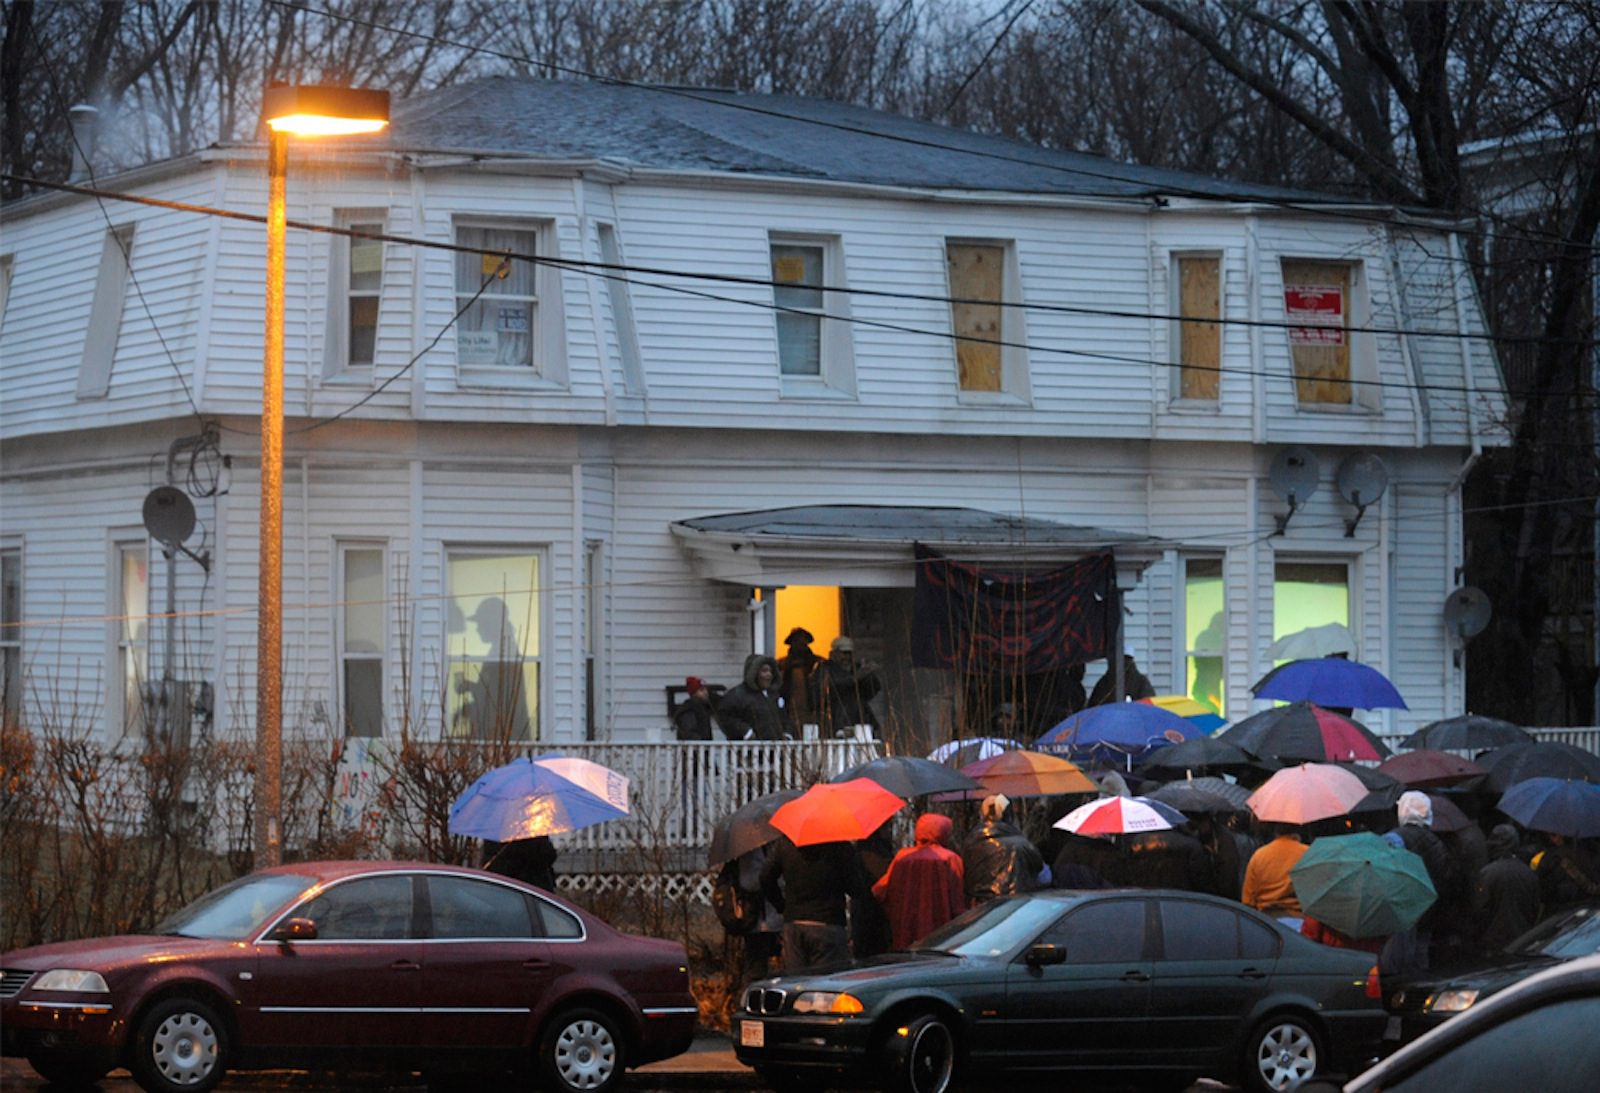 People stand outside of a home in the rain while a projection of people are shown inside. This was part of an art installation in Boston.